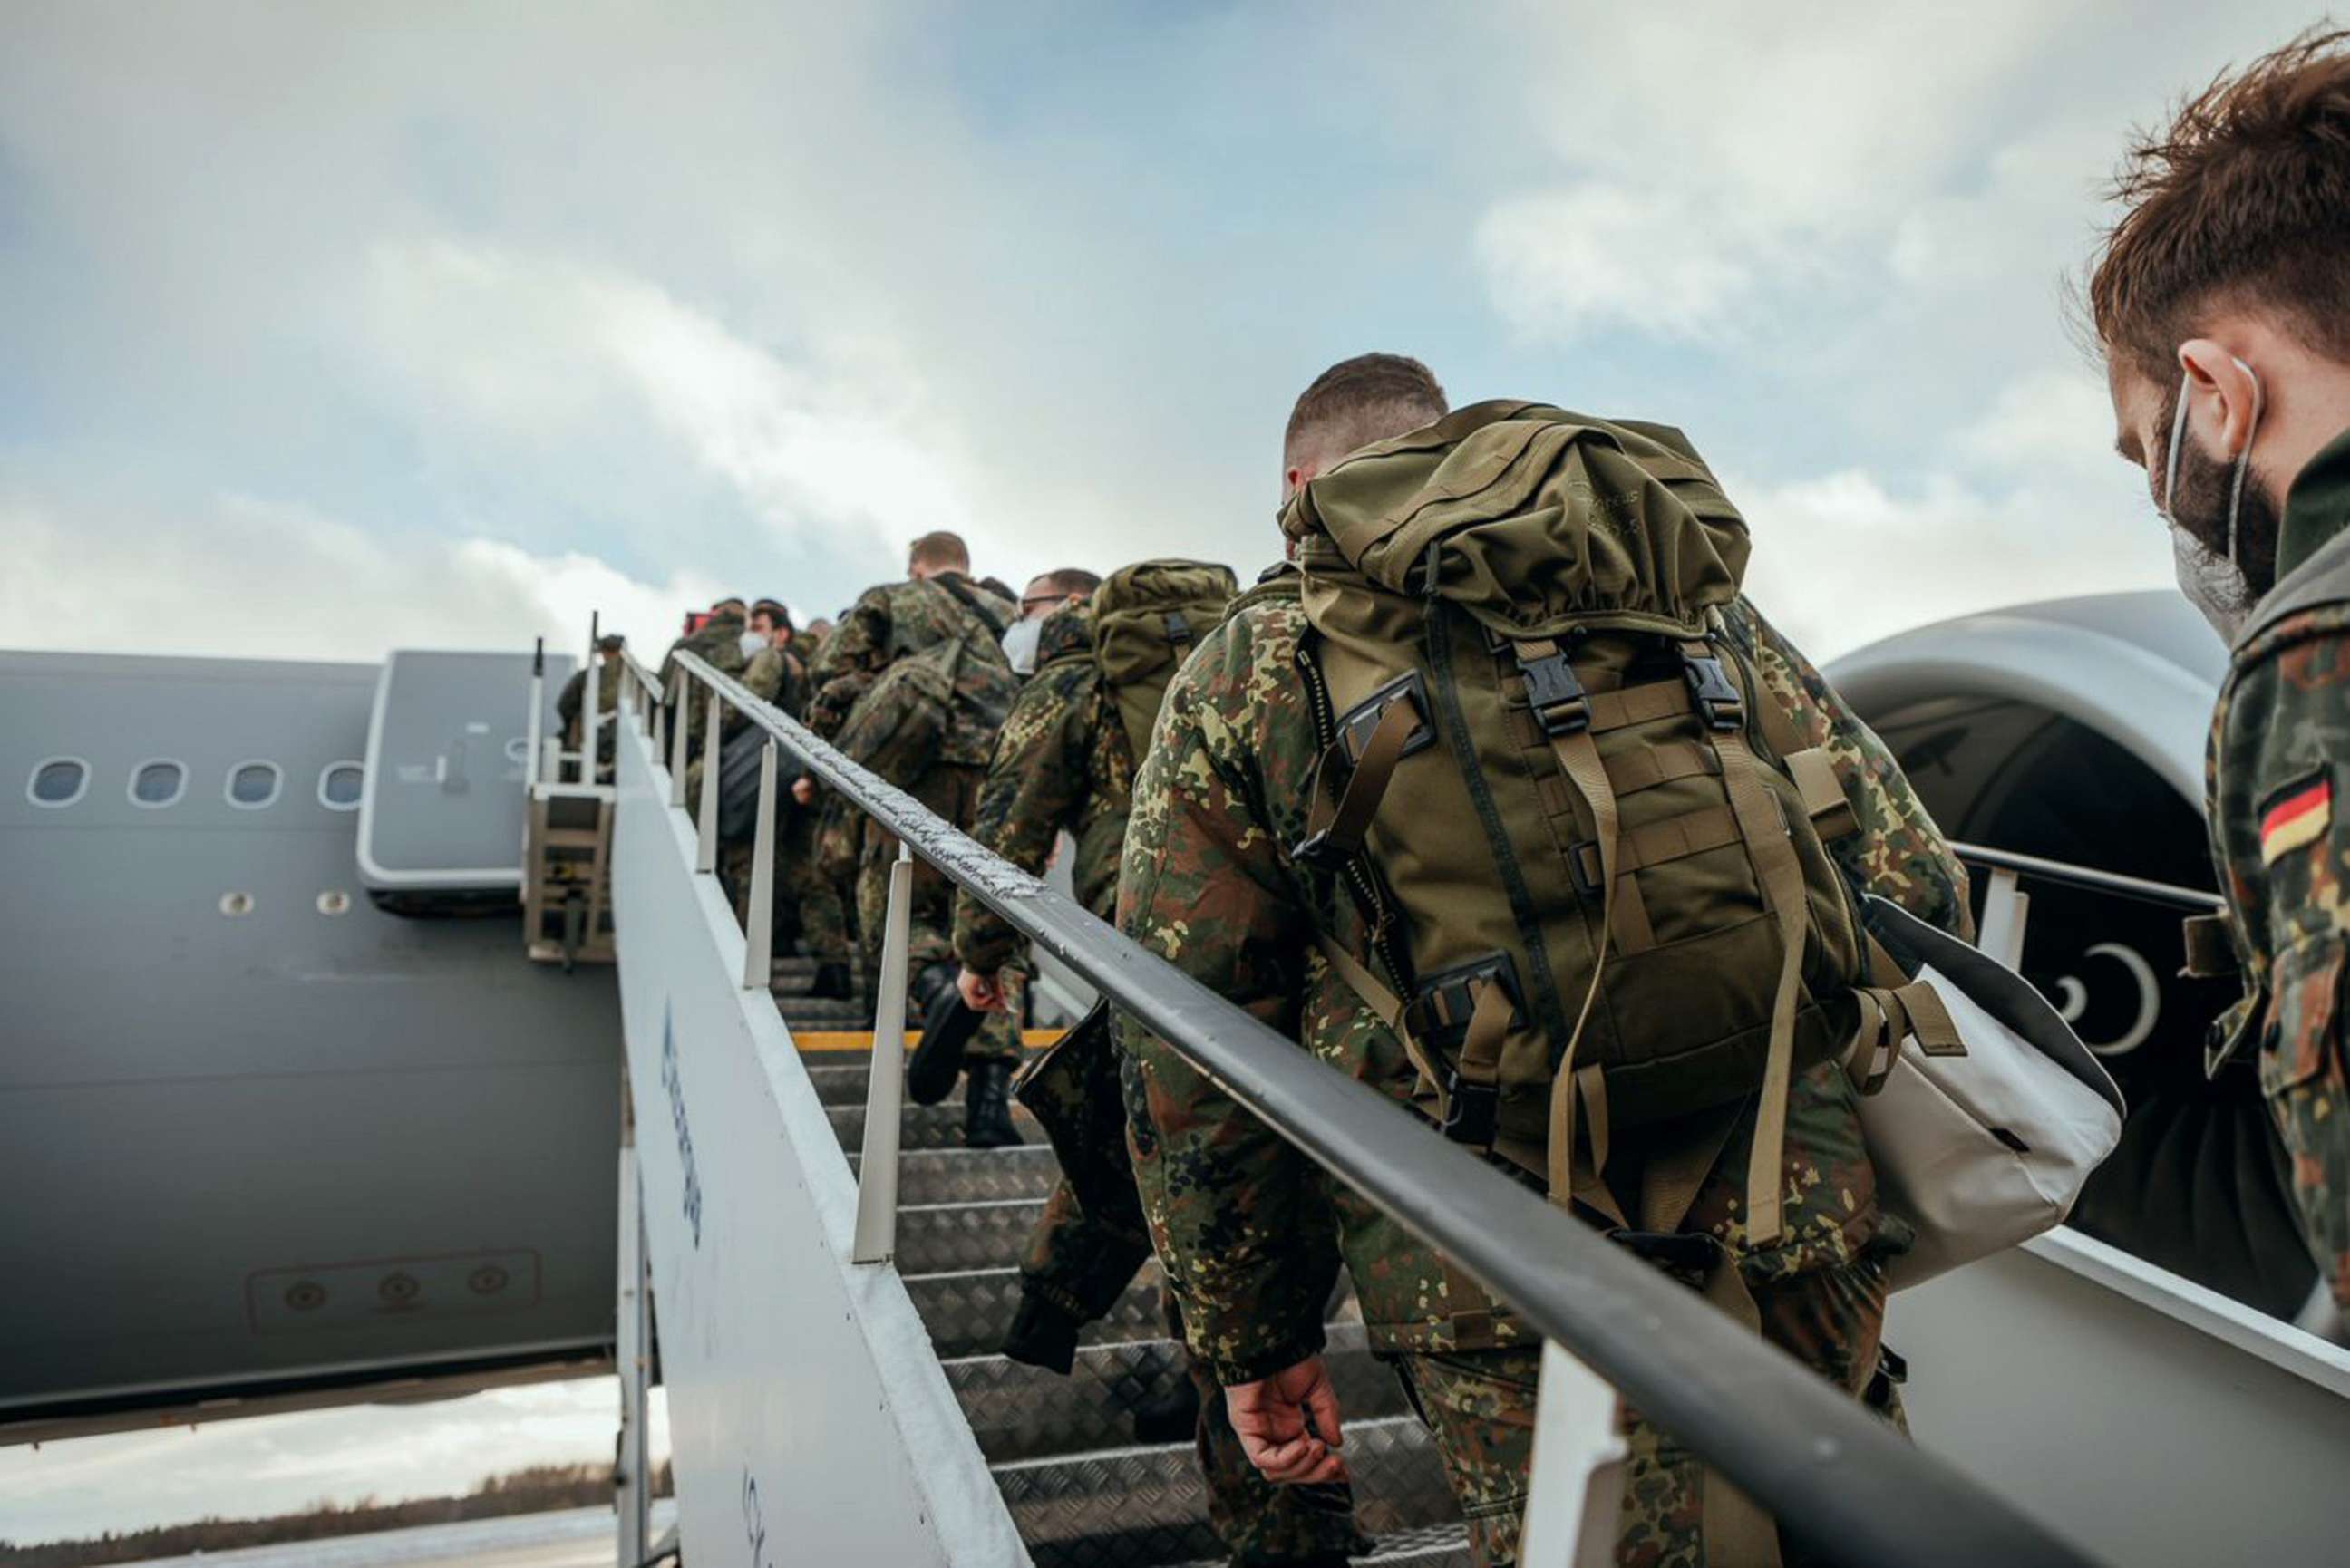 PHOTO: Soldiers from the NATO enhanced Forward Presence Battlegroup depart for Lithuania, Jan. 29, 2022.